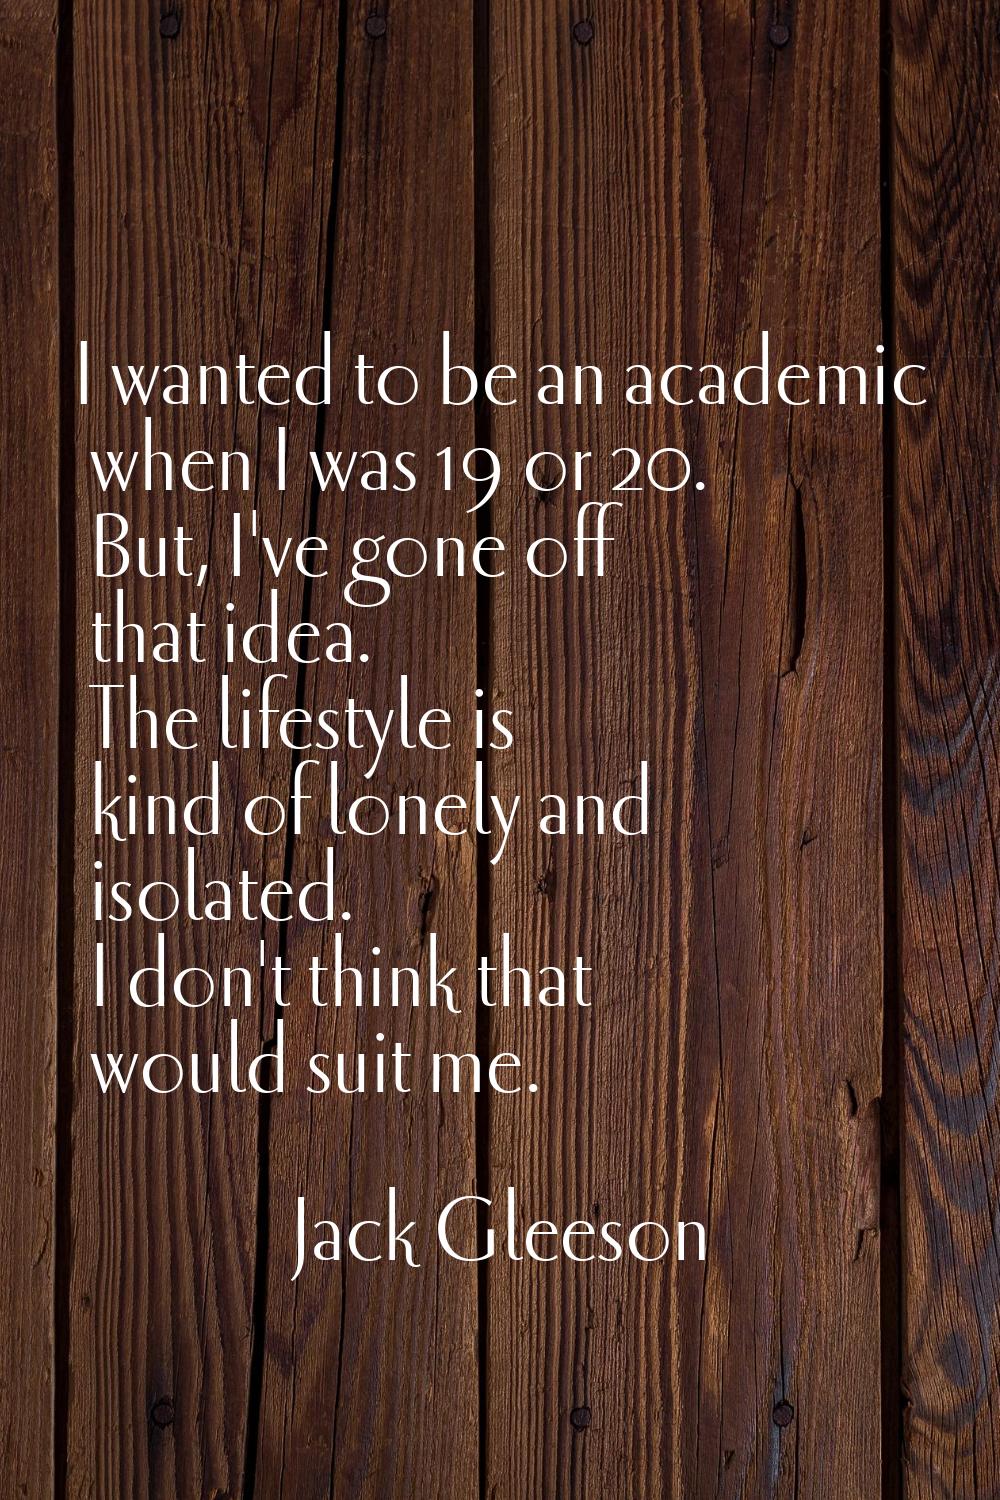 I wanted to be an academic when I was 19 or 20. But, I've gone off that idea. The lifestyle is kind